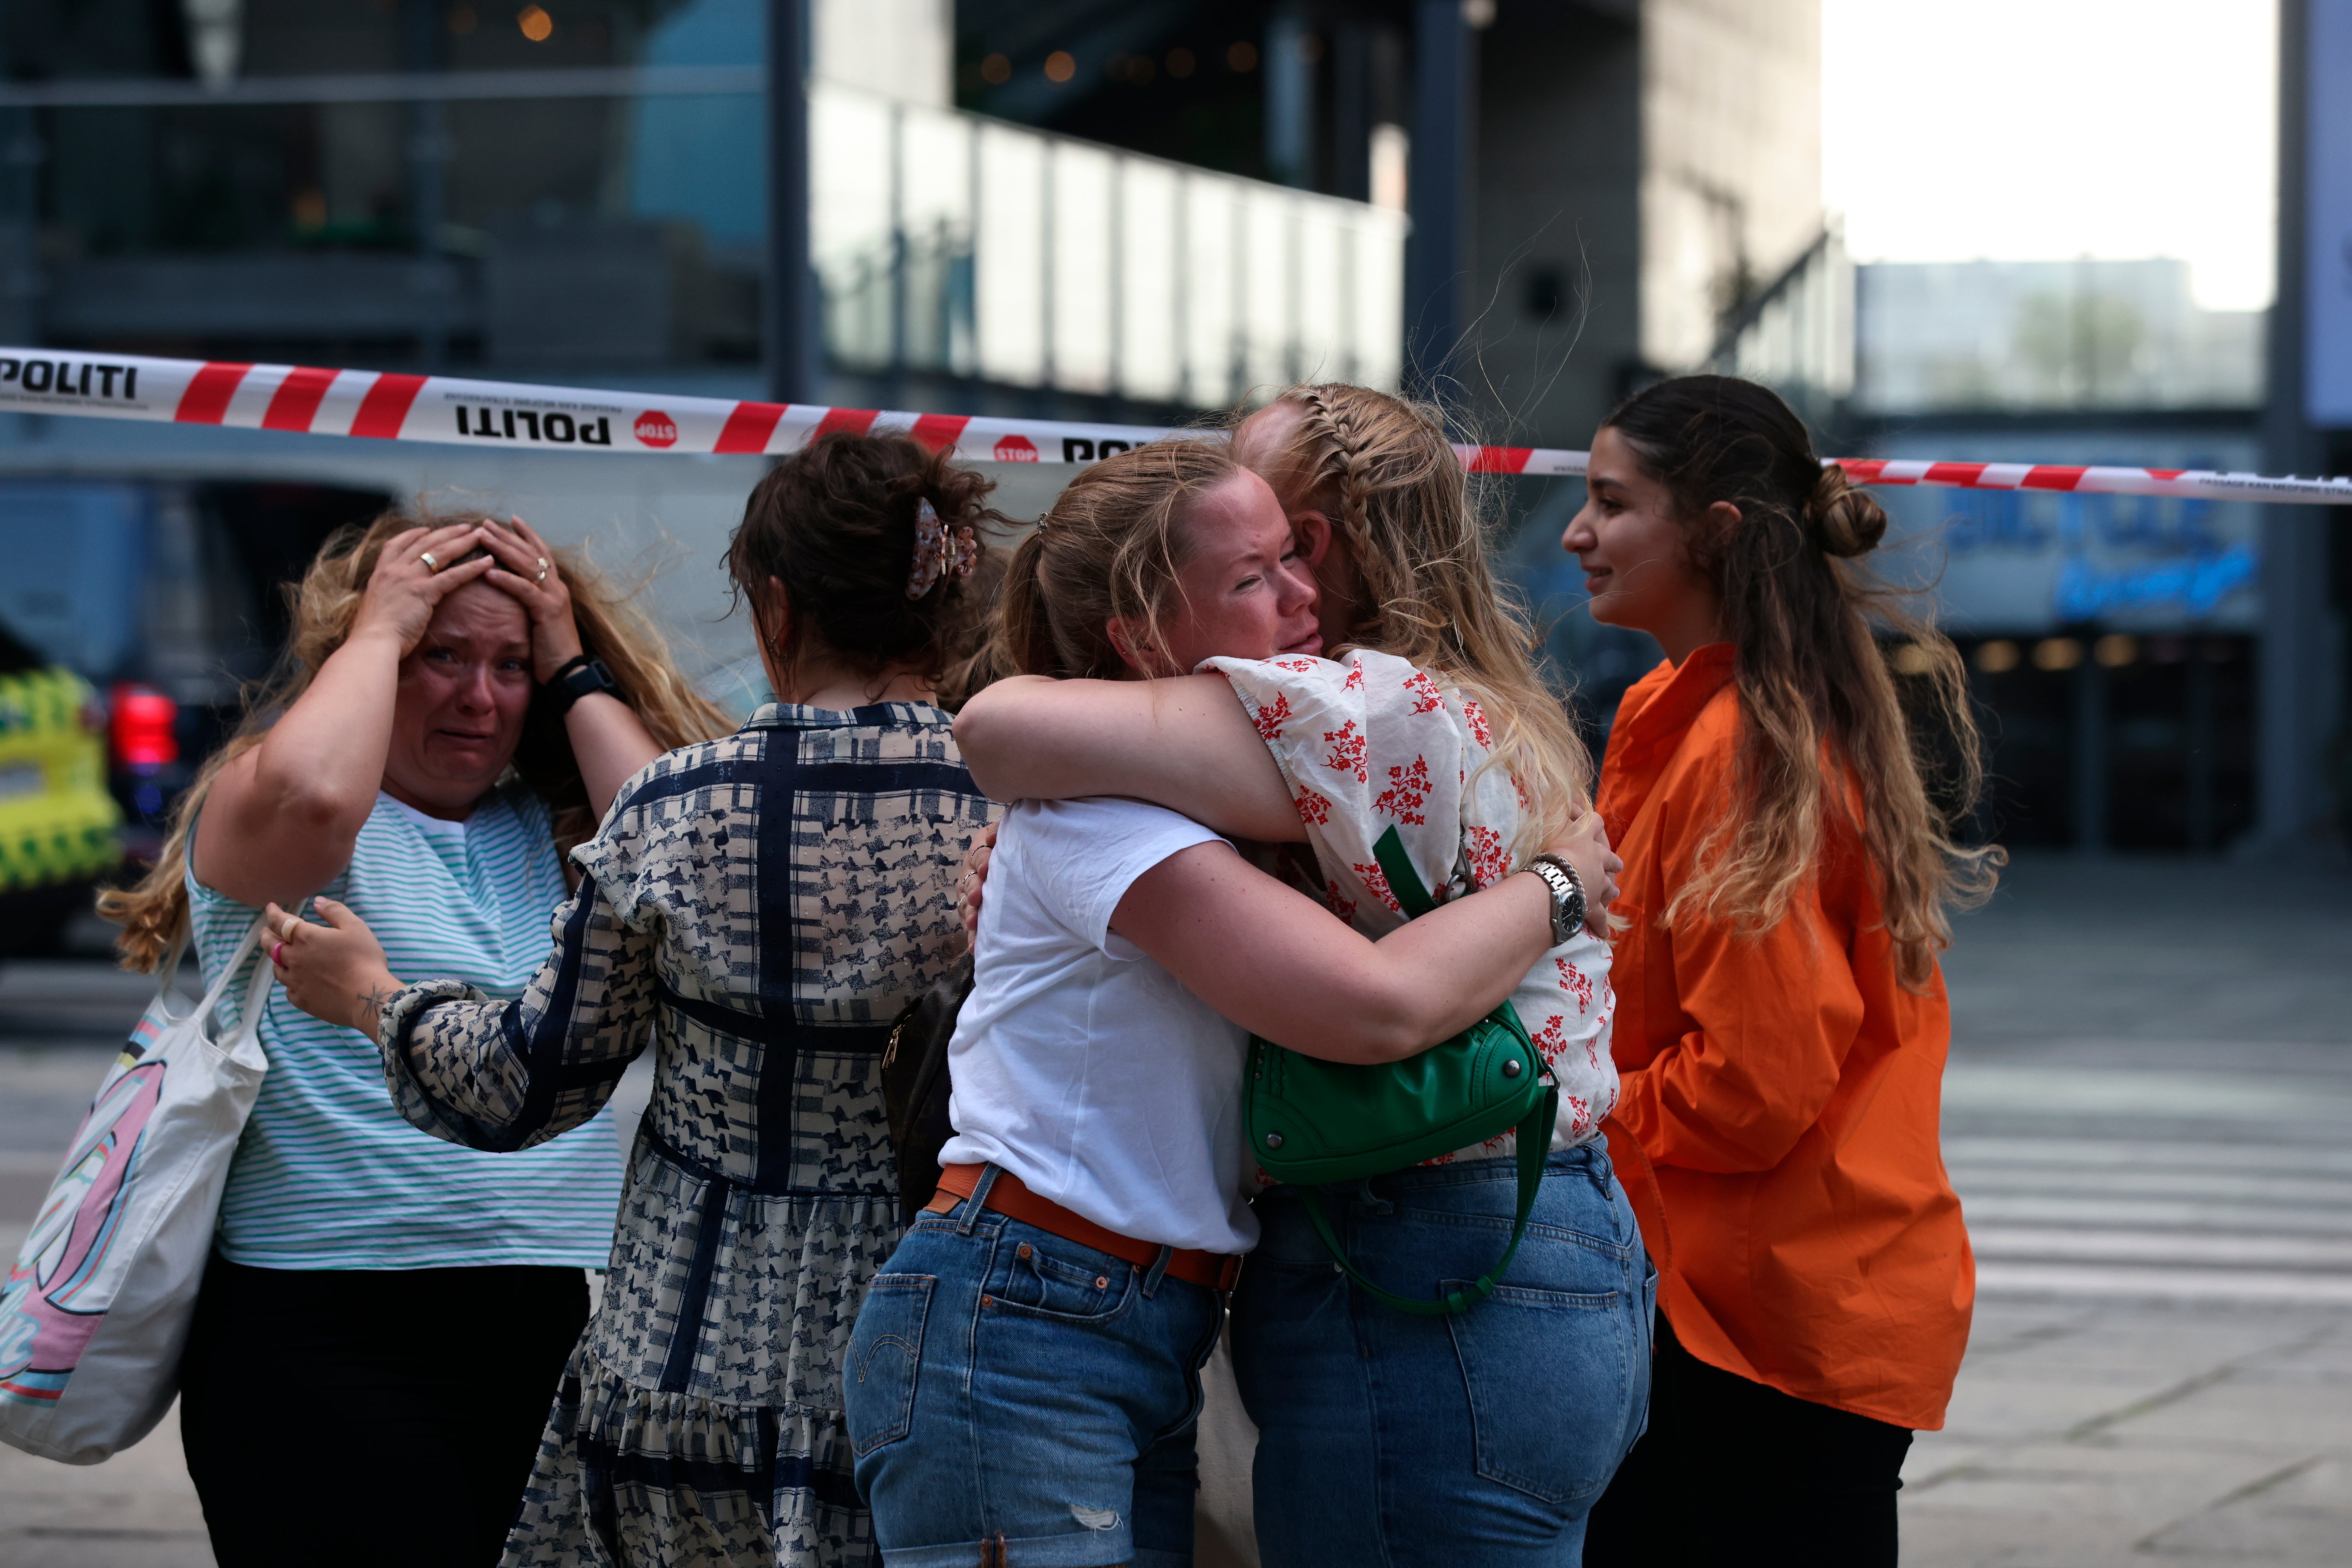 Witnesses have spoken of ‘pure terror’ after a fatal shooting at a Danish shopping centre